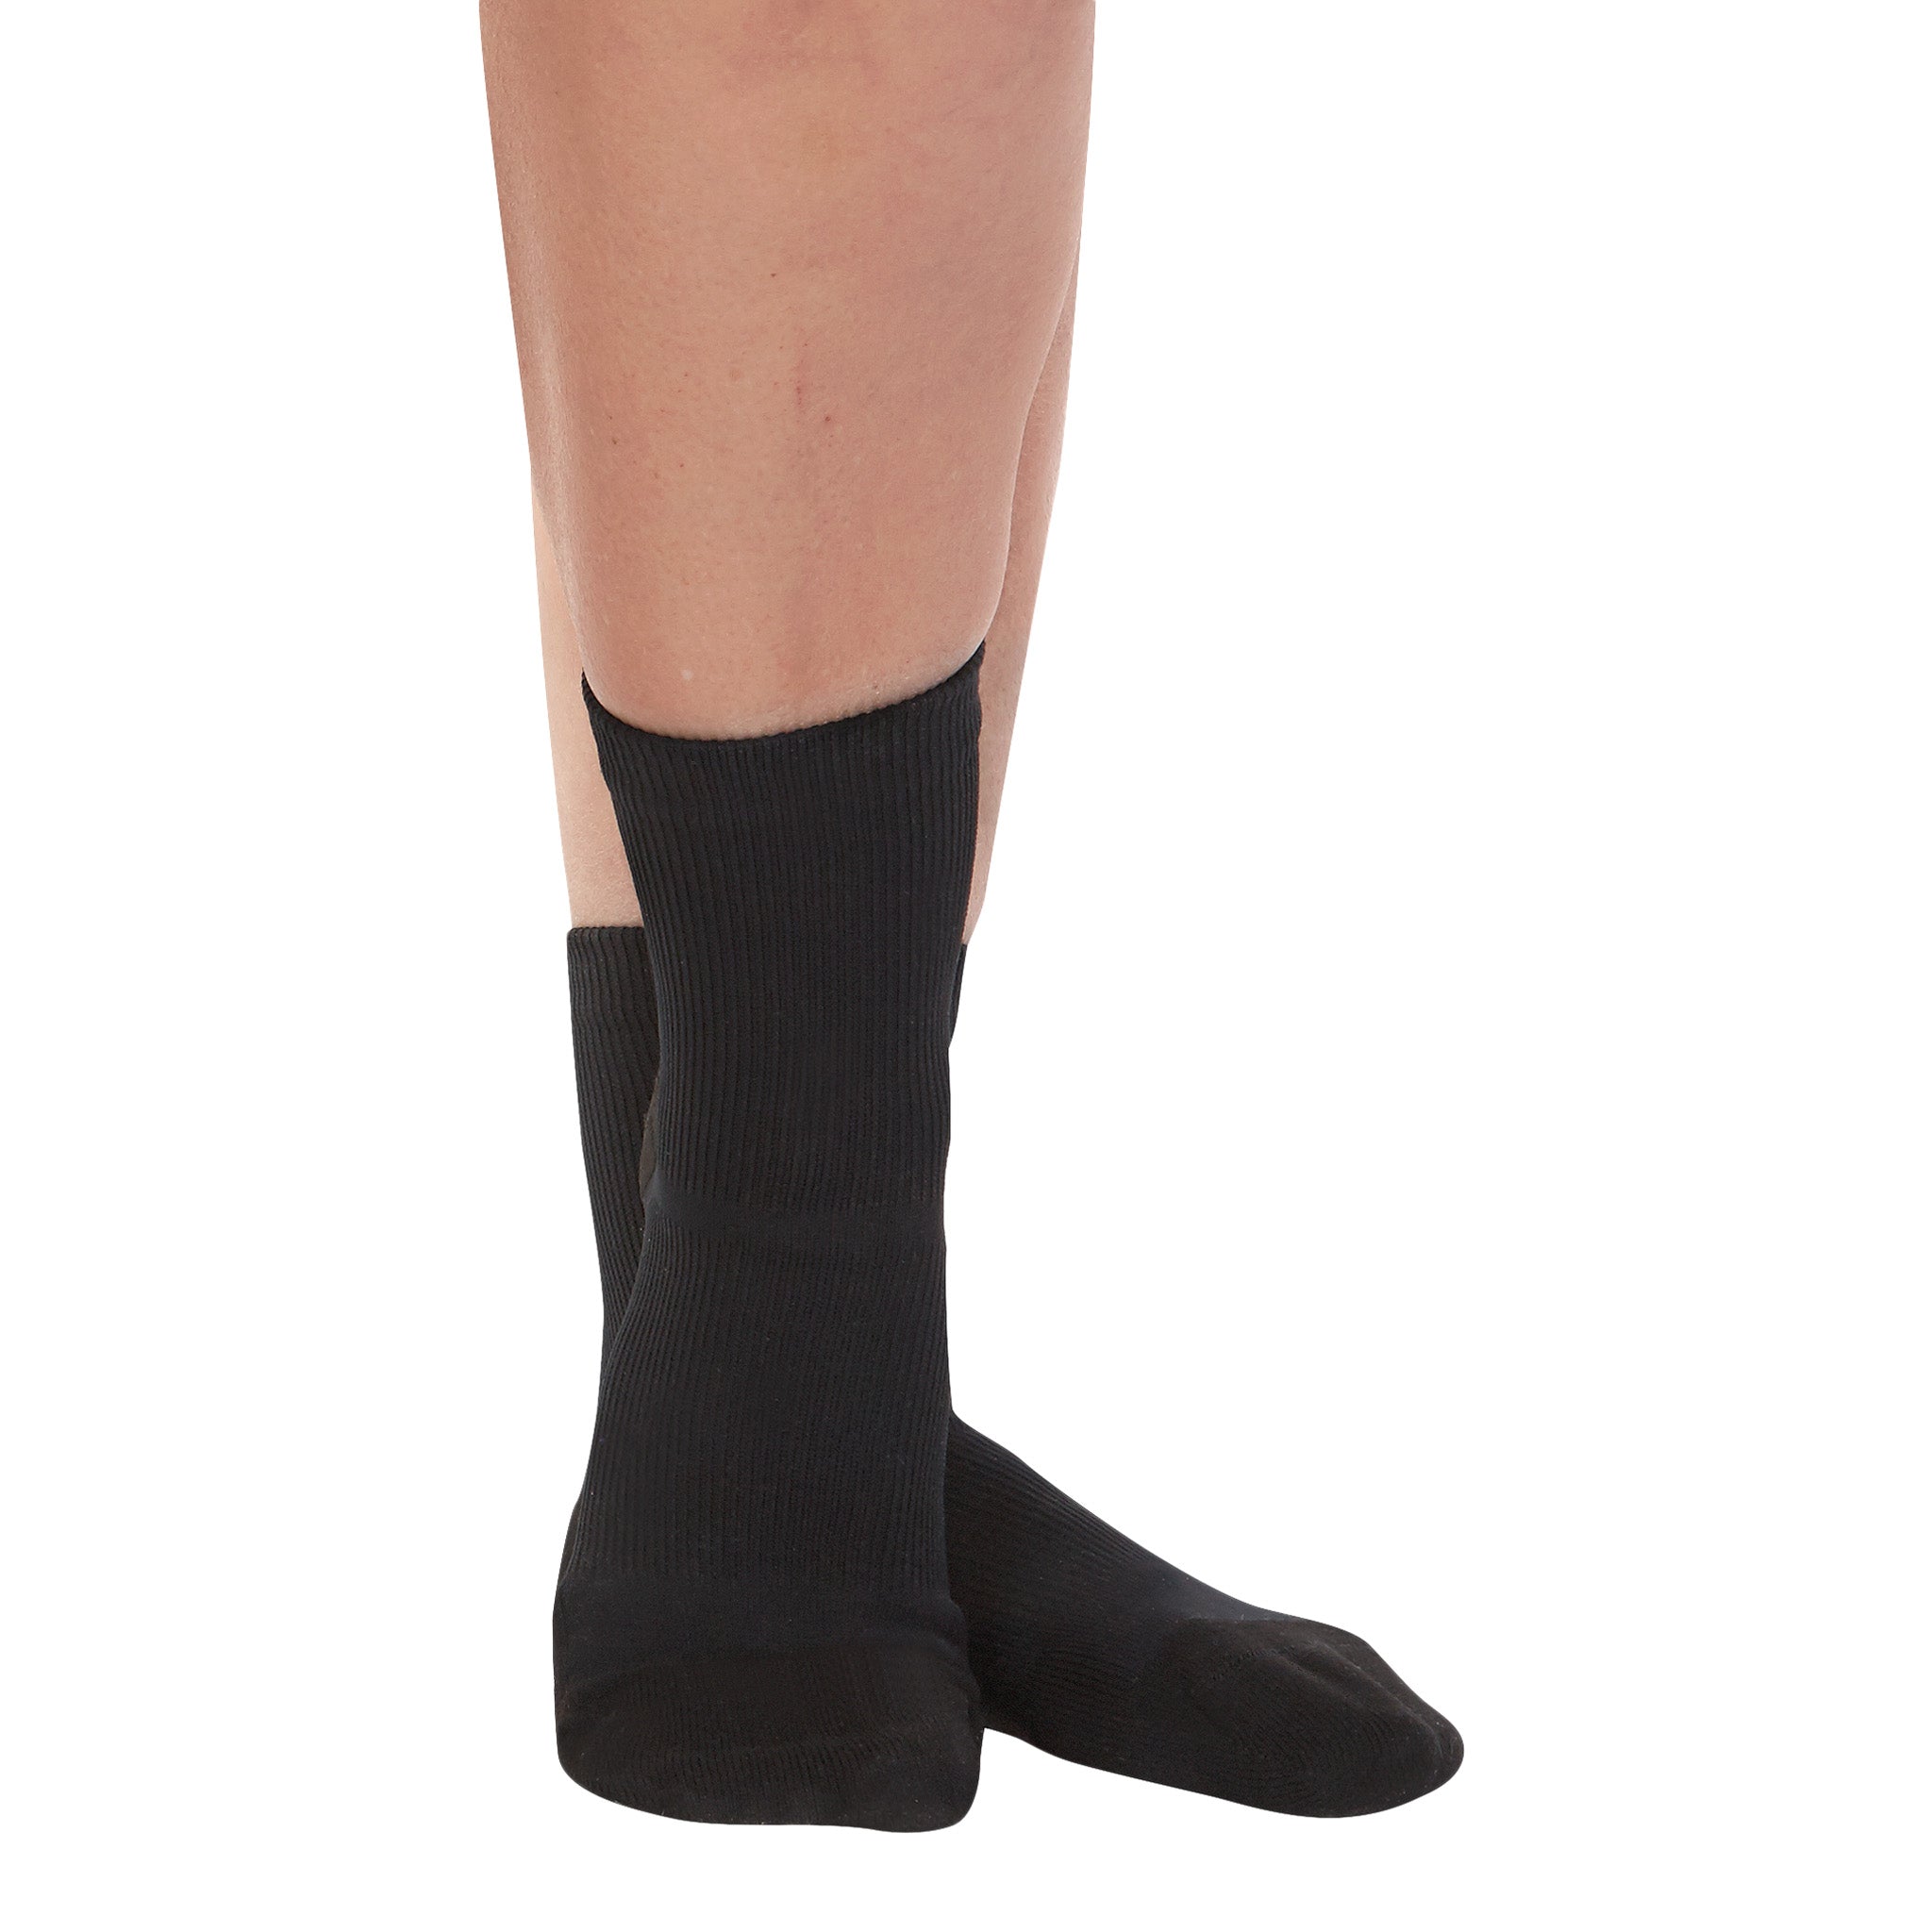  Apolla The Performance Unisex Extra Small Black, As Seen On  Shark Tank Athletic Compression Crew Socks for Women and Men - Moisture  Control, Ankle and Arch Support, Made in USA 